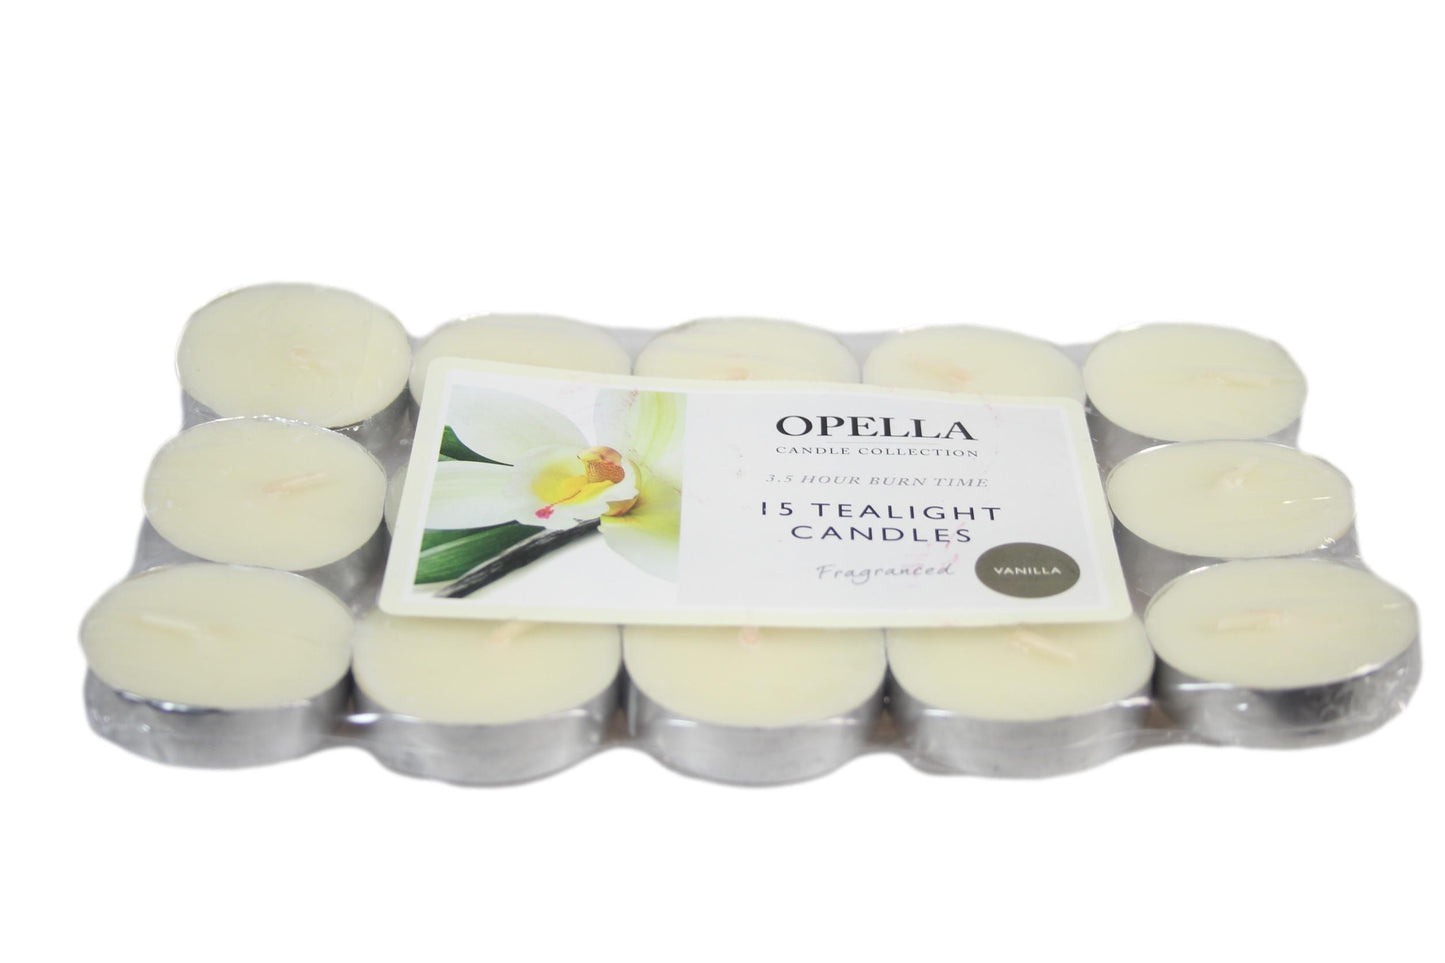 Beautifully Scented Opella Vanilla 12 Tealight Candles 3.5 Hour Burn Time CD001V (Parcel Rate)